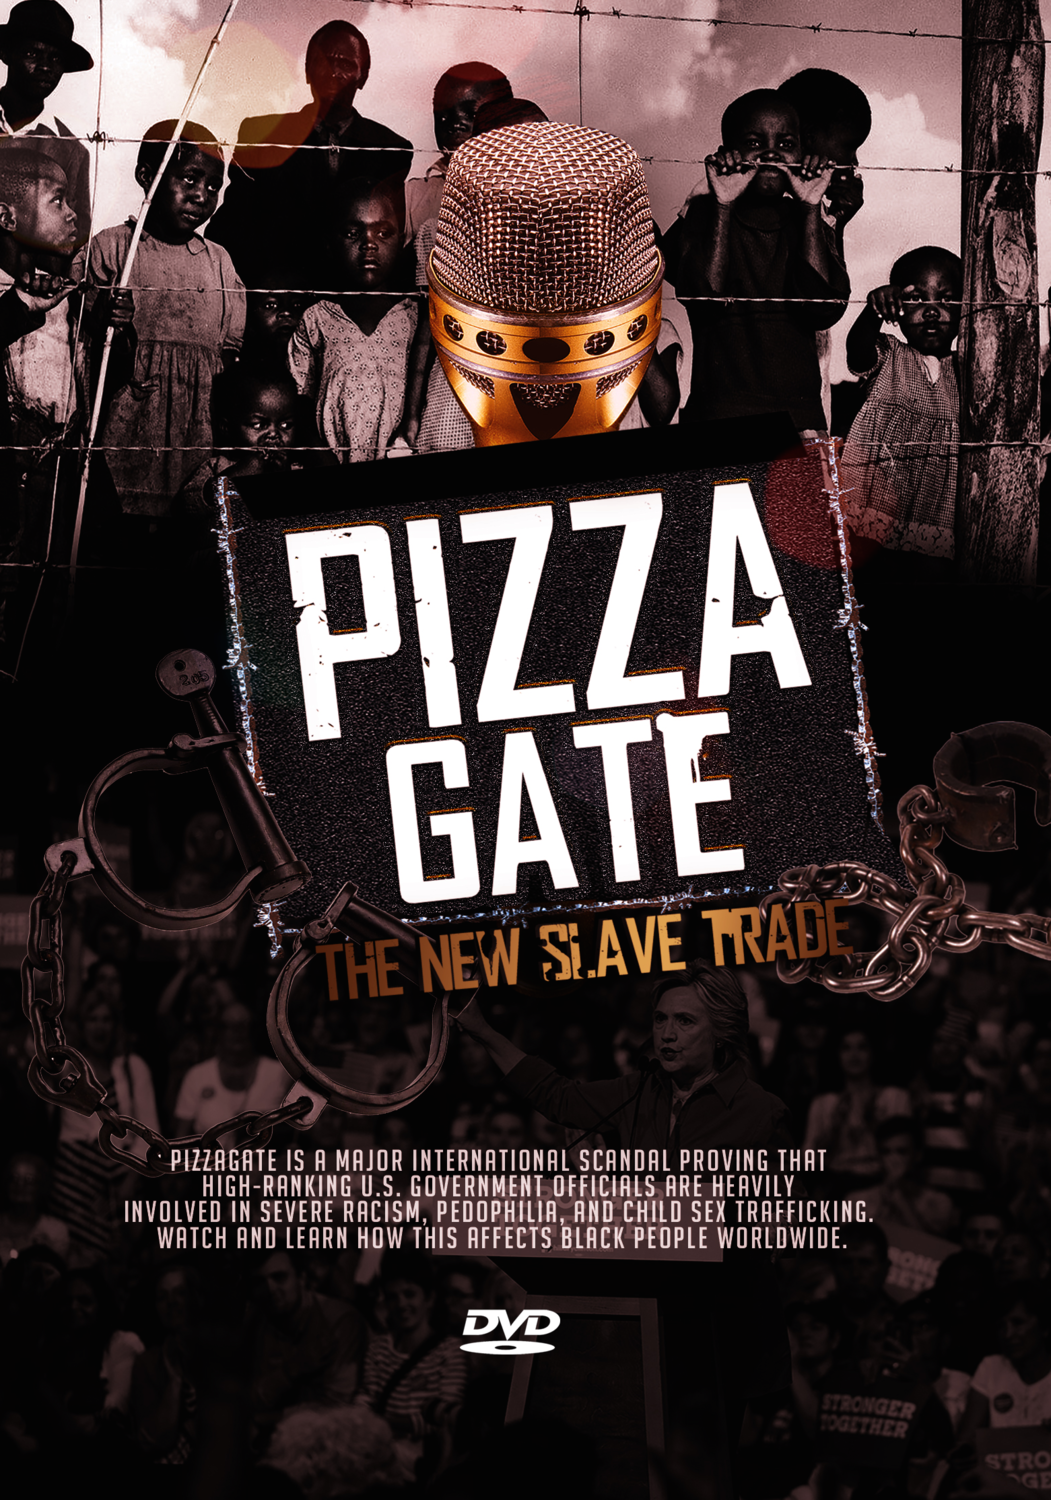 Pizzagate: The New Slave Trade (3-Disc DVD Set) - .mp4 Electronic Email Version